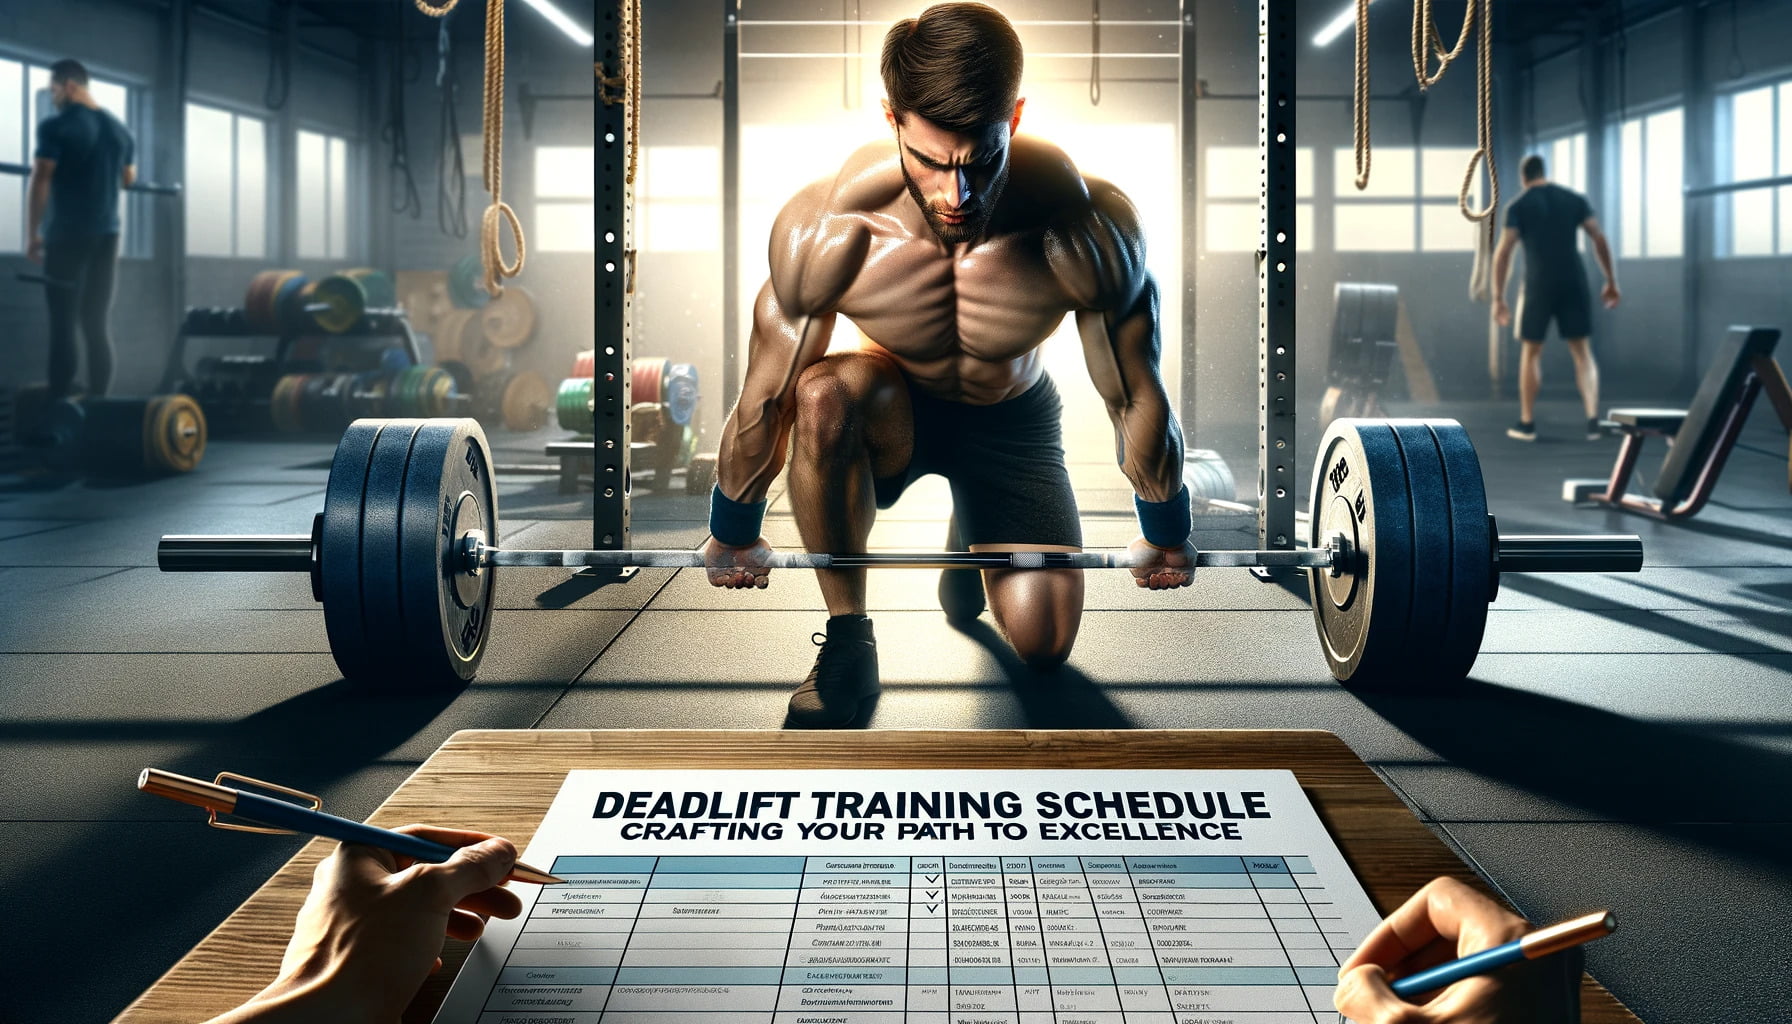 You are currently viewing Deadlift Training Schedule: Crafting Your Path to Excellence